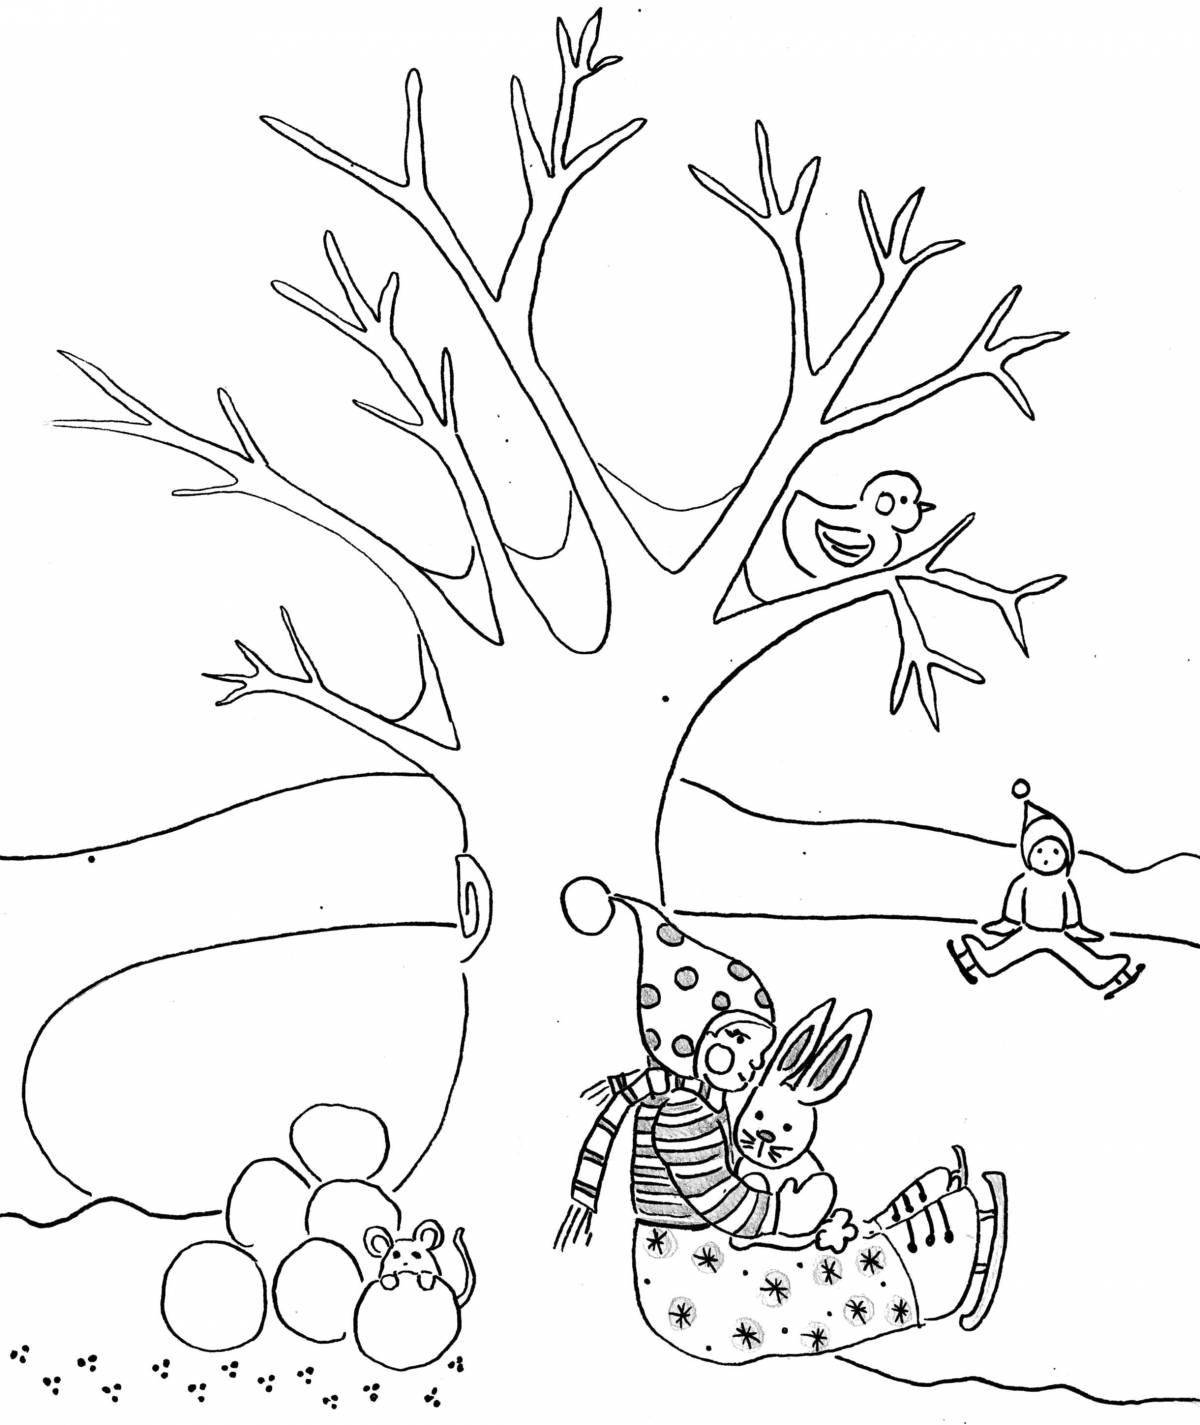 Glowing winter tree coloring page